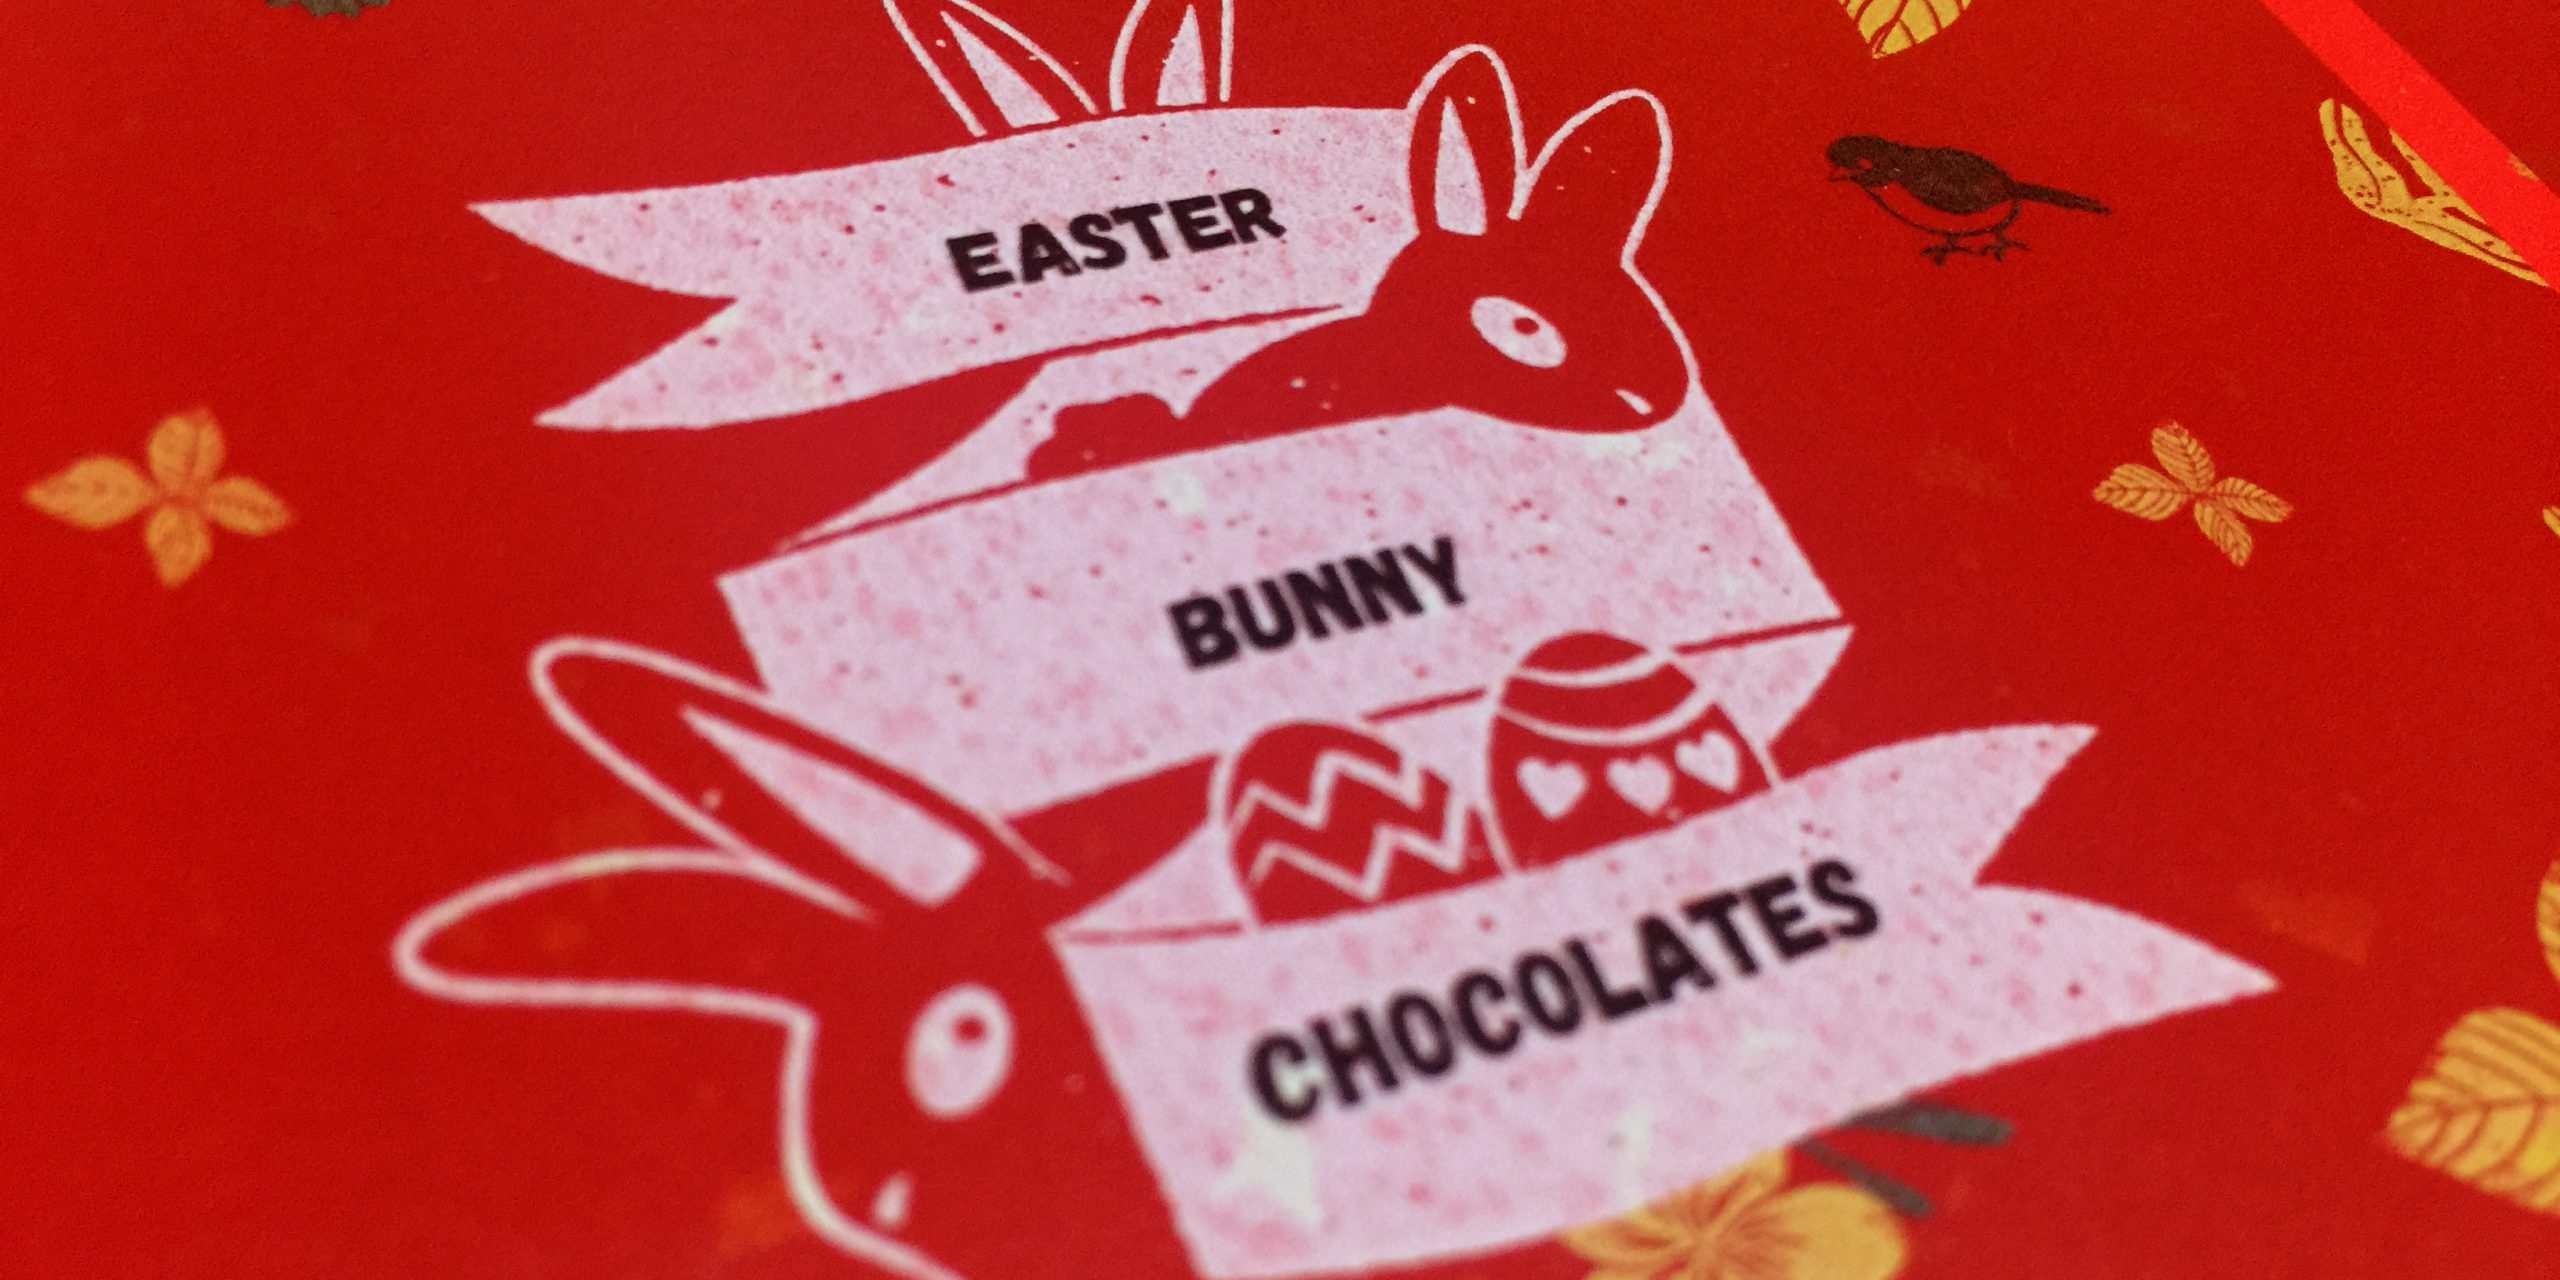 Gold Speckle Red Paper Sticker Material, White Underlay Printing, Easter Bunny Chocolates, Uncut Sticker Sheets